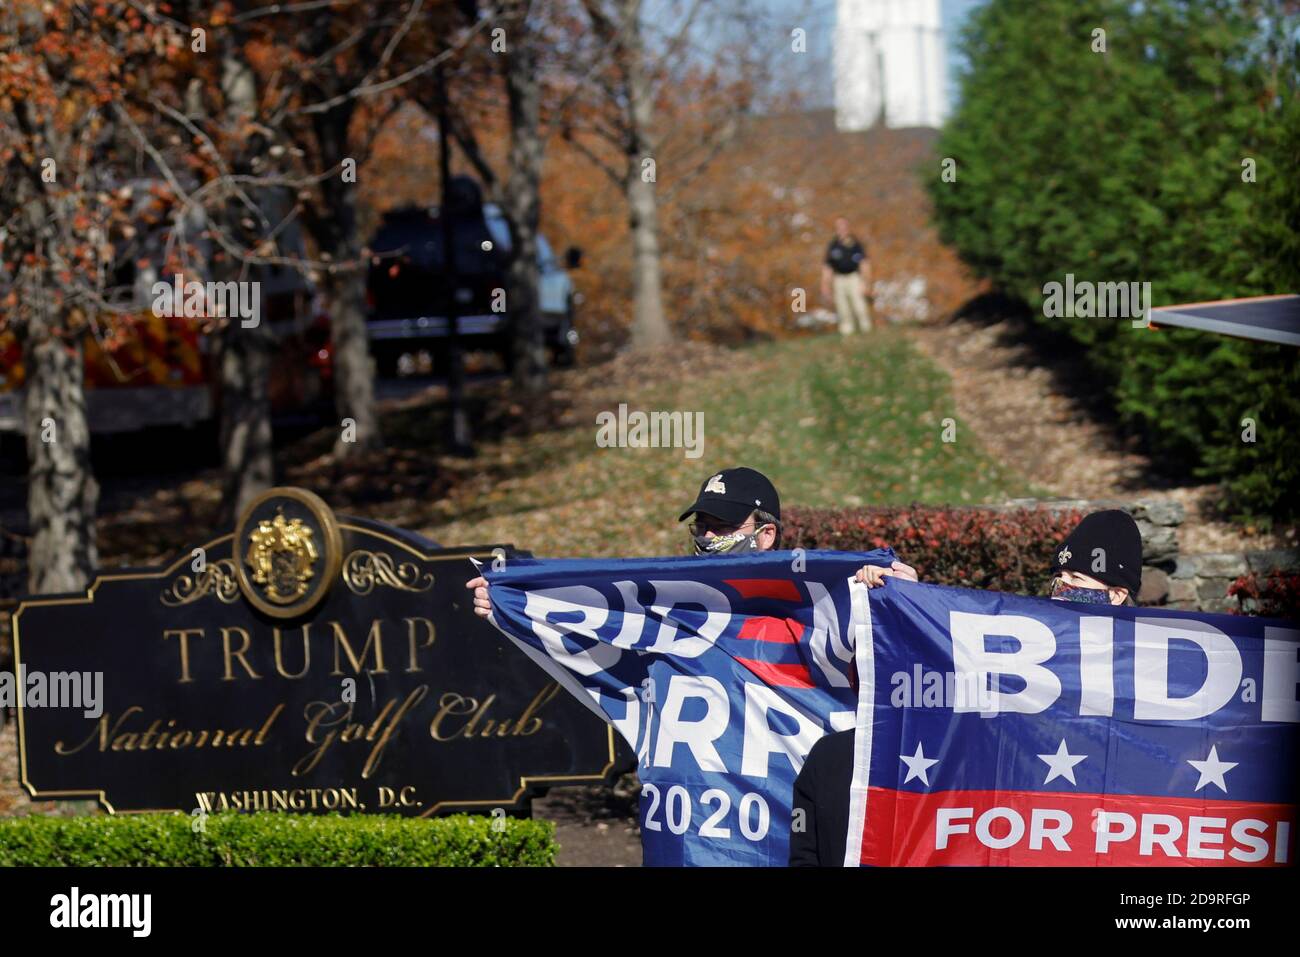 U.S. President Donald Trump arrives in a motorcade at Trump National Golf Club, as supporters of Democratic presidential nominee Joe Biden react as votes continue to be counted following the 2020 U.S. presidential election in Sterling, Virginia, U.S., November 7, 2020.  REUTERS/Carlos Barria Stock Photo